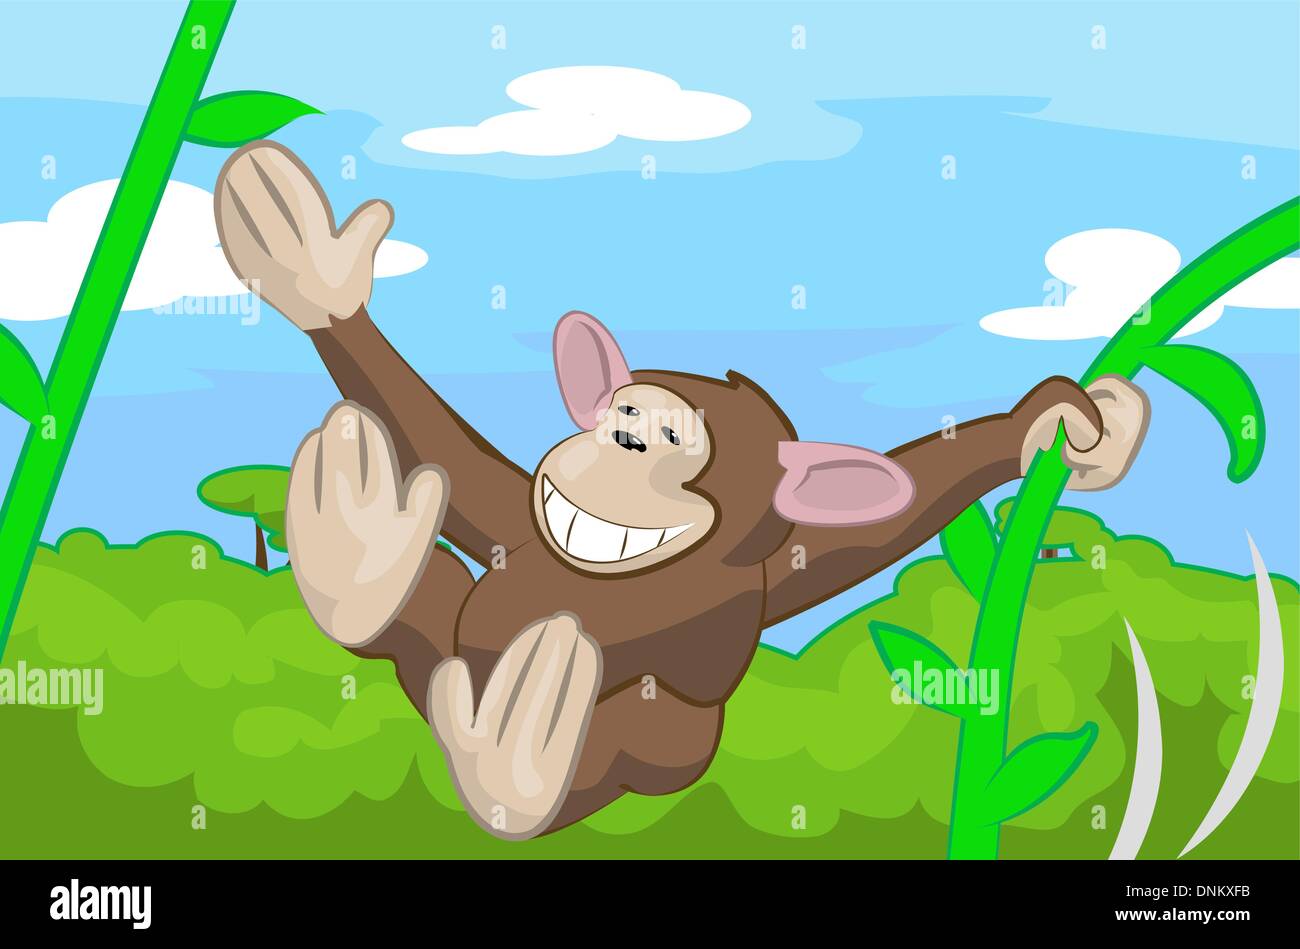 A cute monkey swinging through the trees Stock Vector